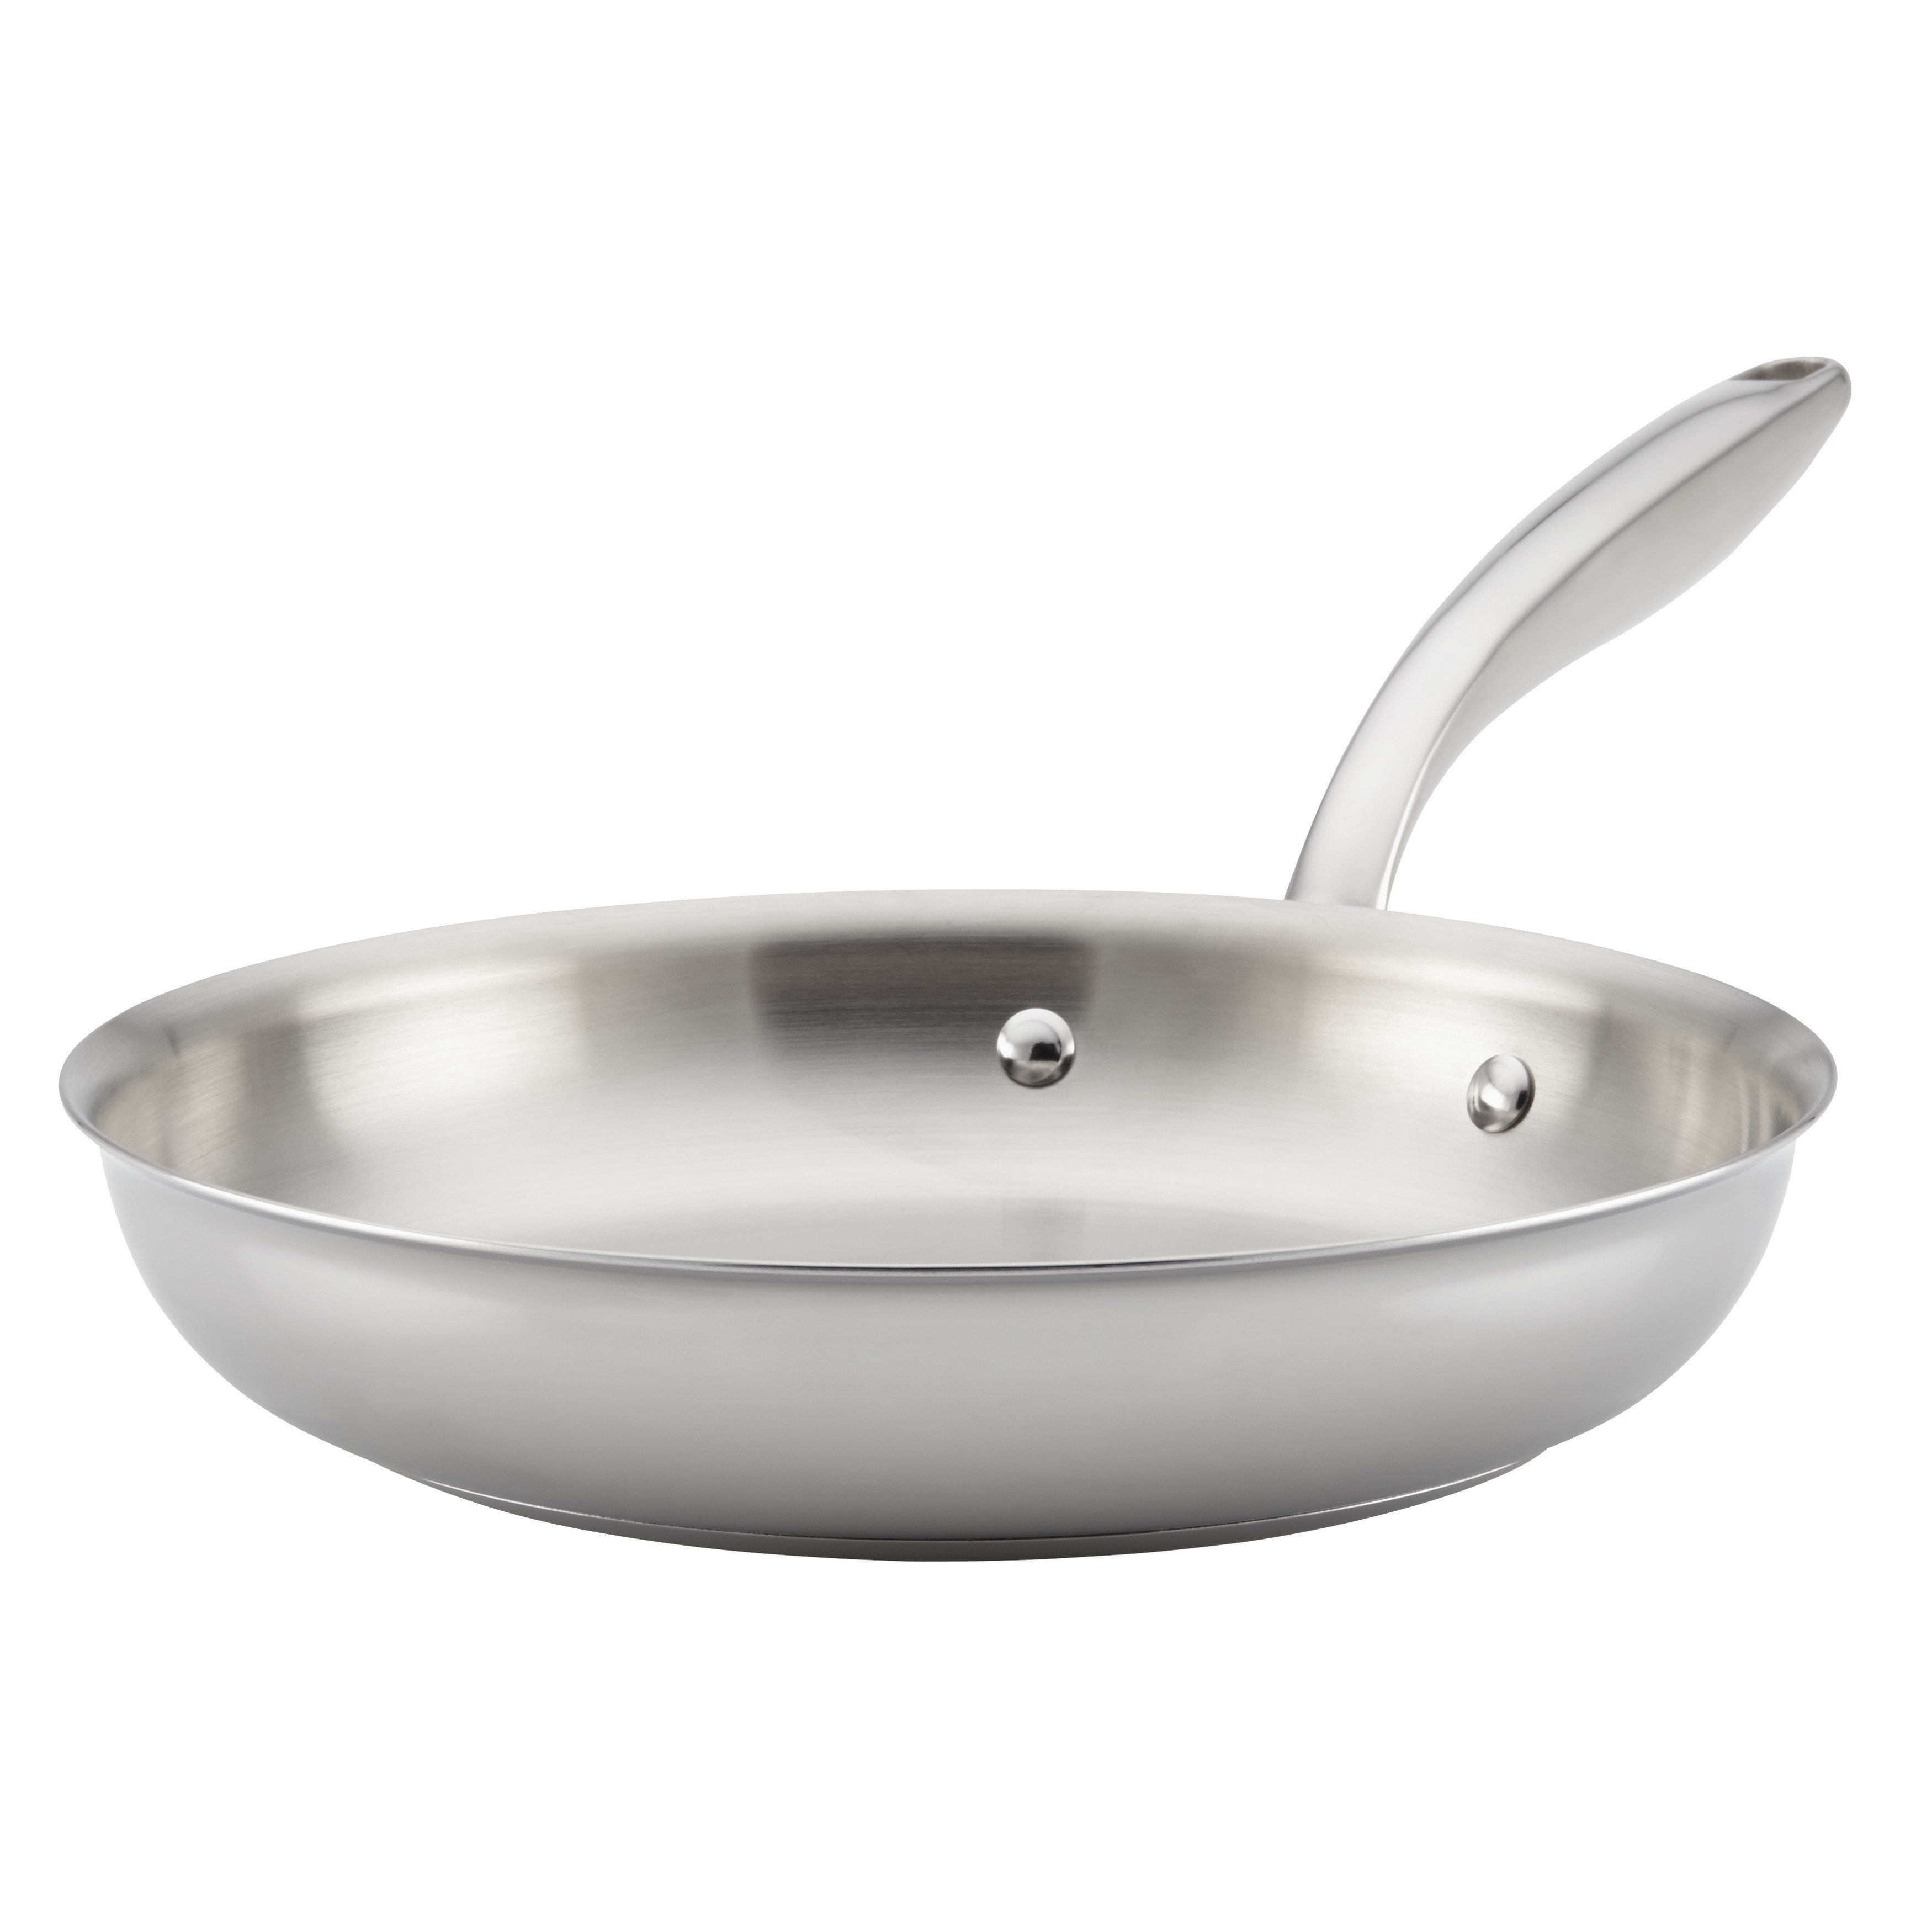 Breville Thermal Pro Clad Stainless Steel 10-inch Fry Pan - Bed